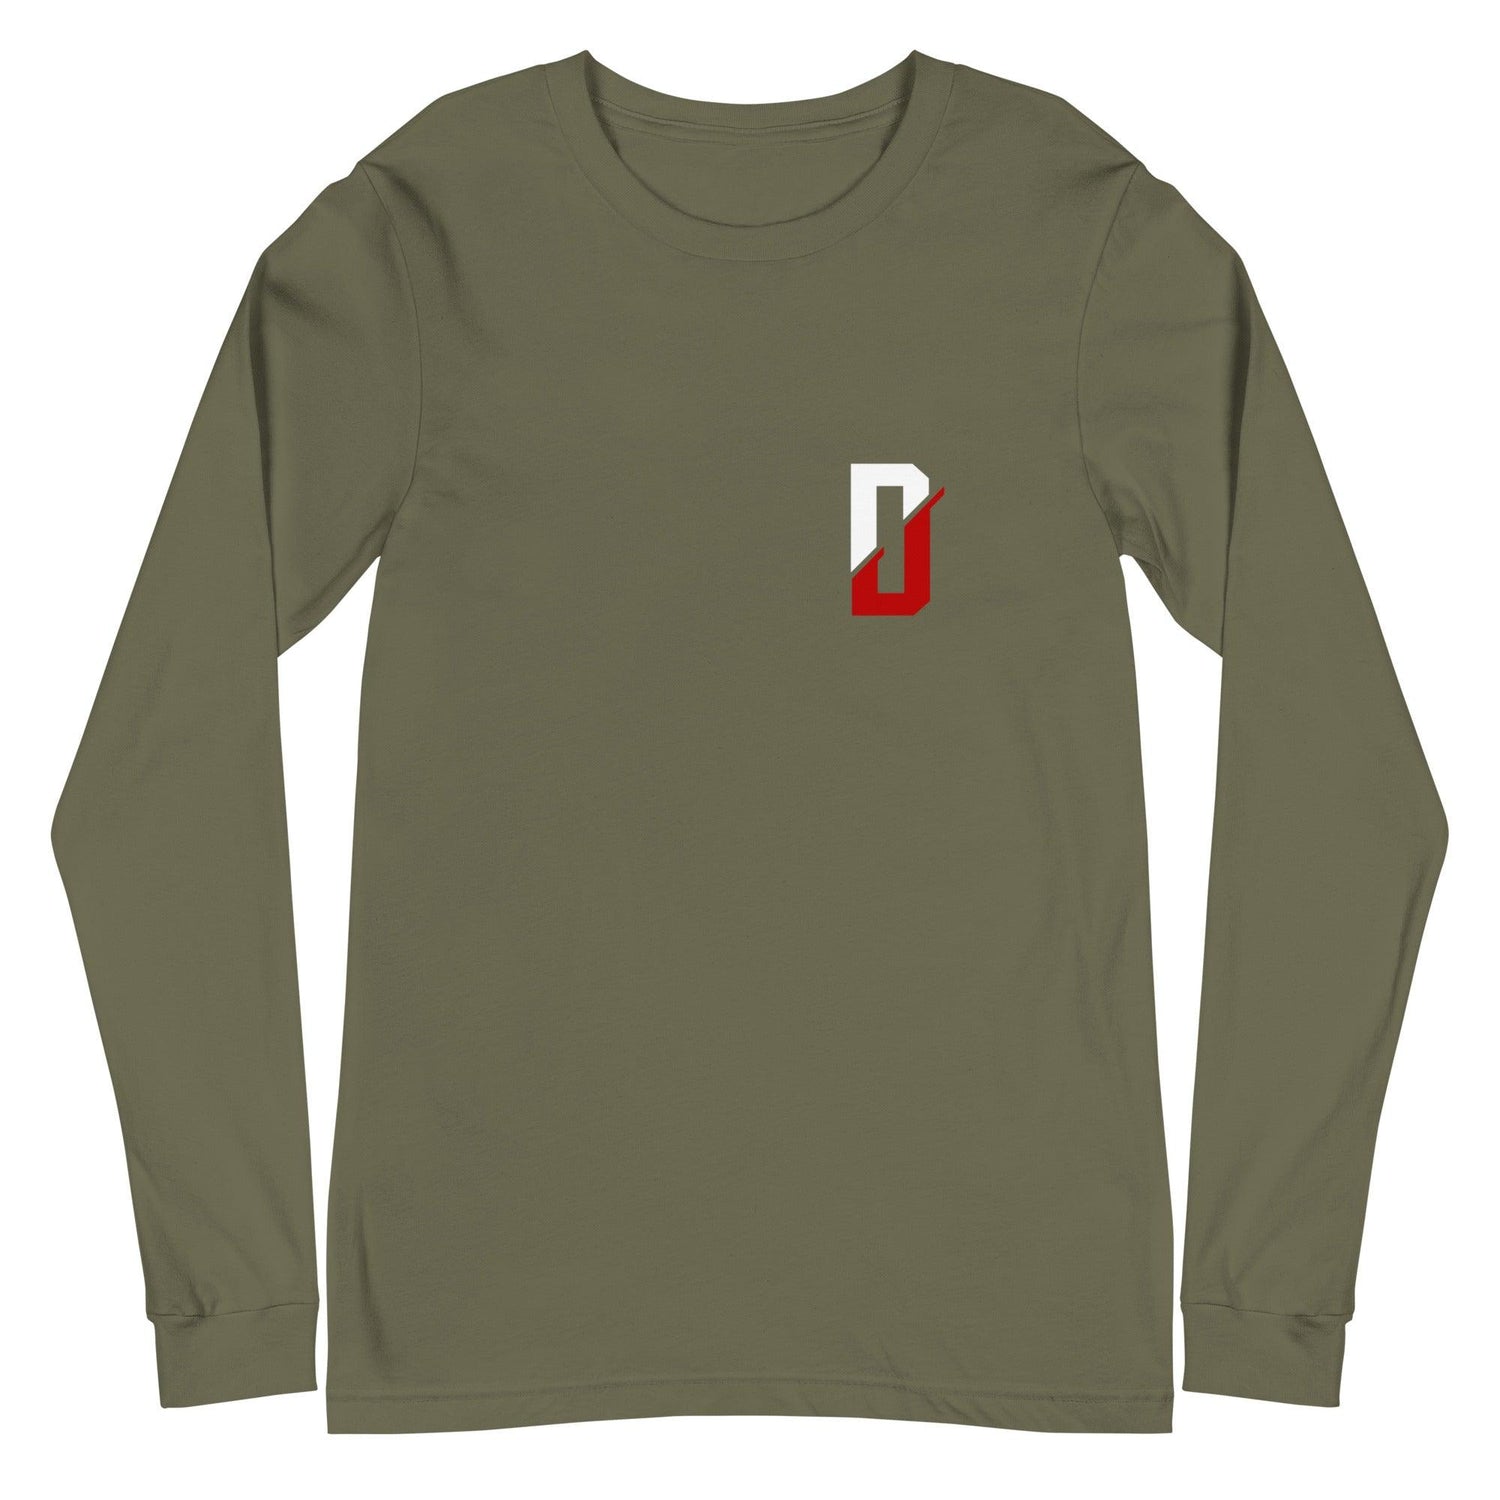 Jay Driver “Signature” Long Sleeve Tee - Fan Arch